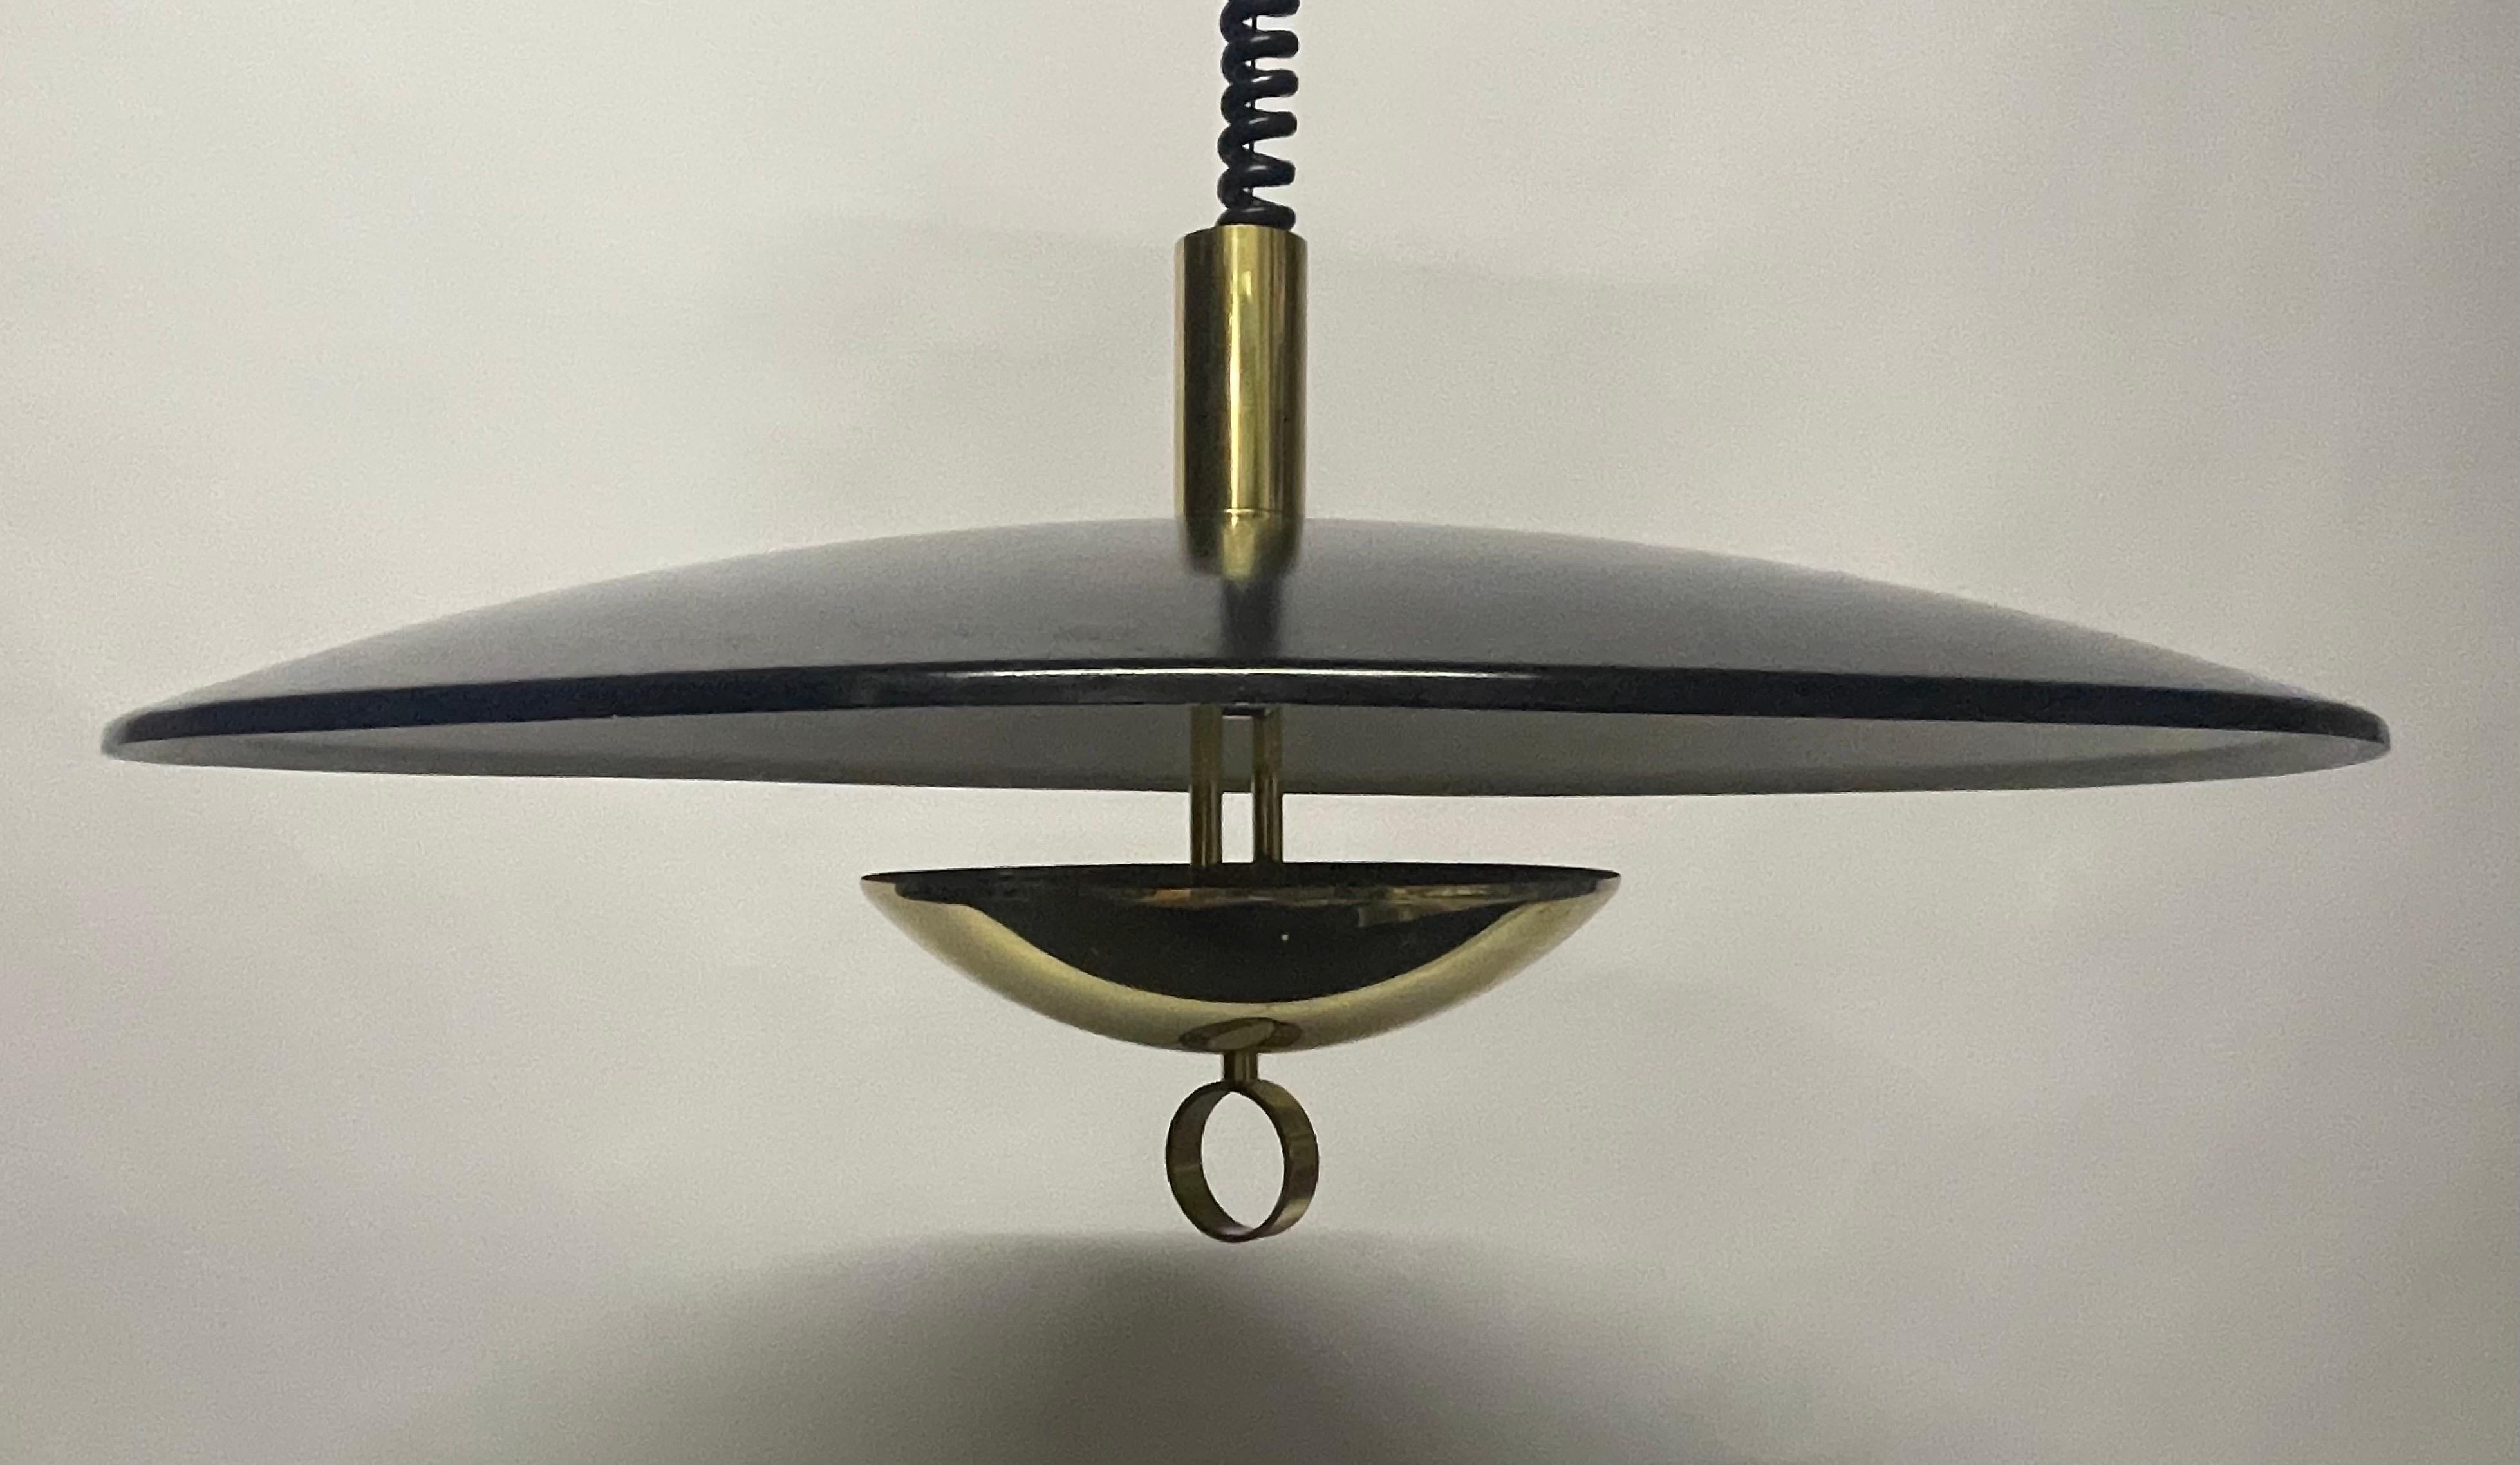 Rare pendant lamp by Hillebrand, Germany circa 1950s.
Cup-shaped reflector in white and black lacquered aluminium. Counter cup in polished brass.
Adjustable in the height. min. 25.59 inches - max. 64.96 inches.
In an excellent vintage